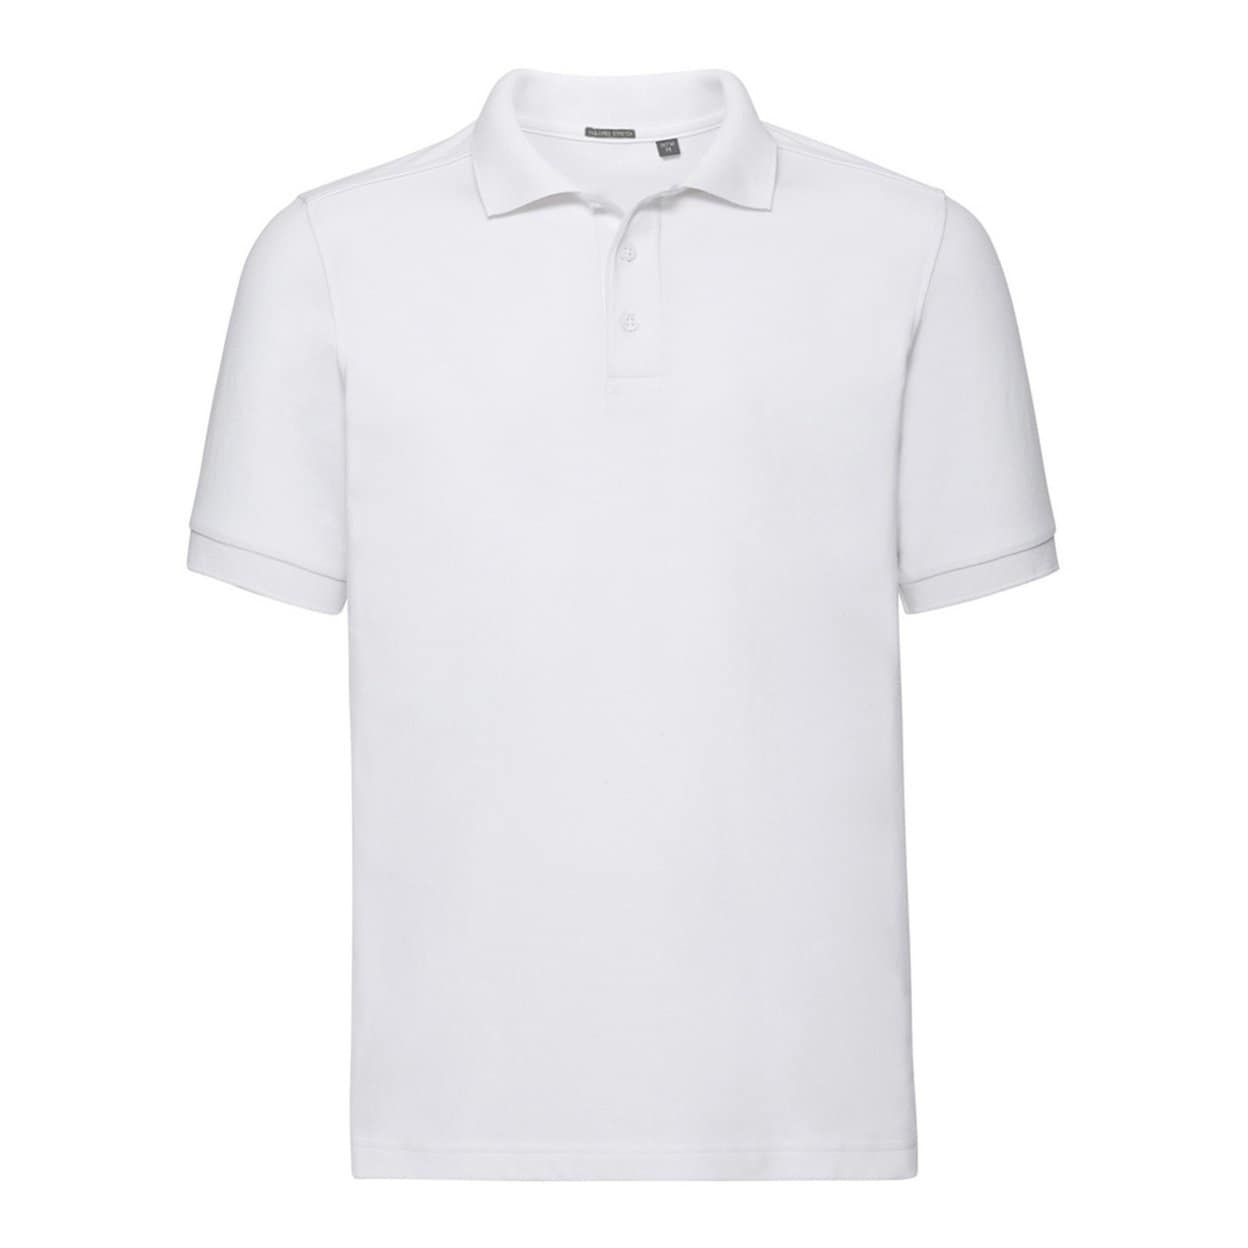 Russell Mens Tailored Stretch Pique Polo Shirt